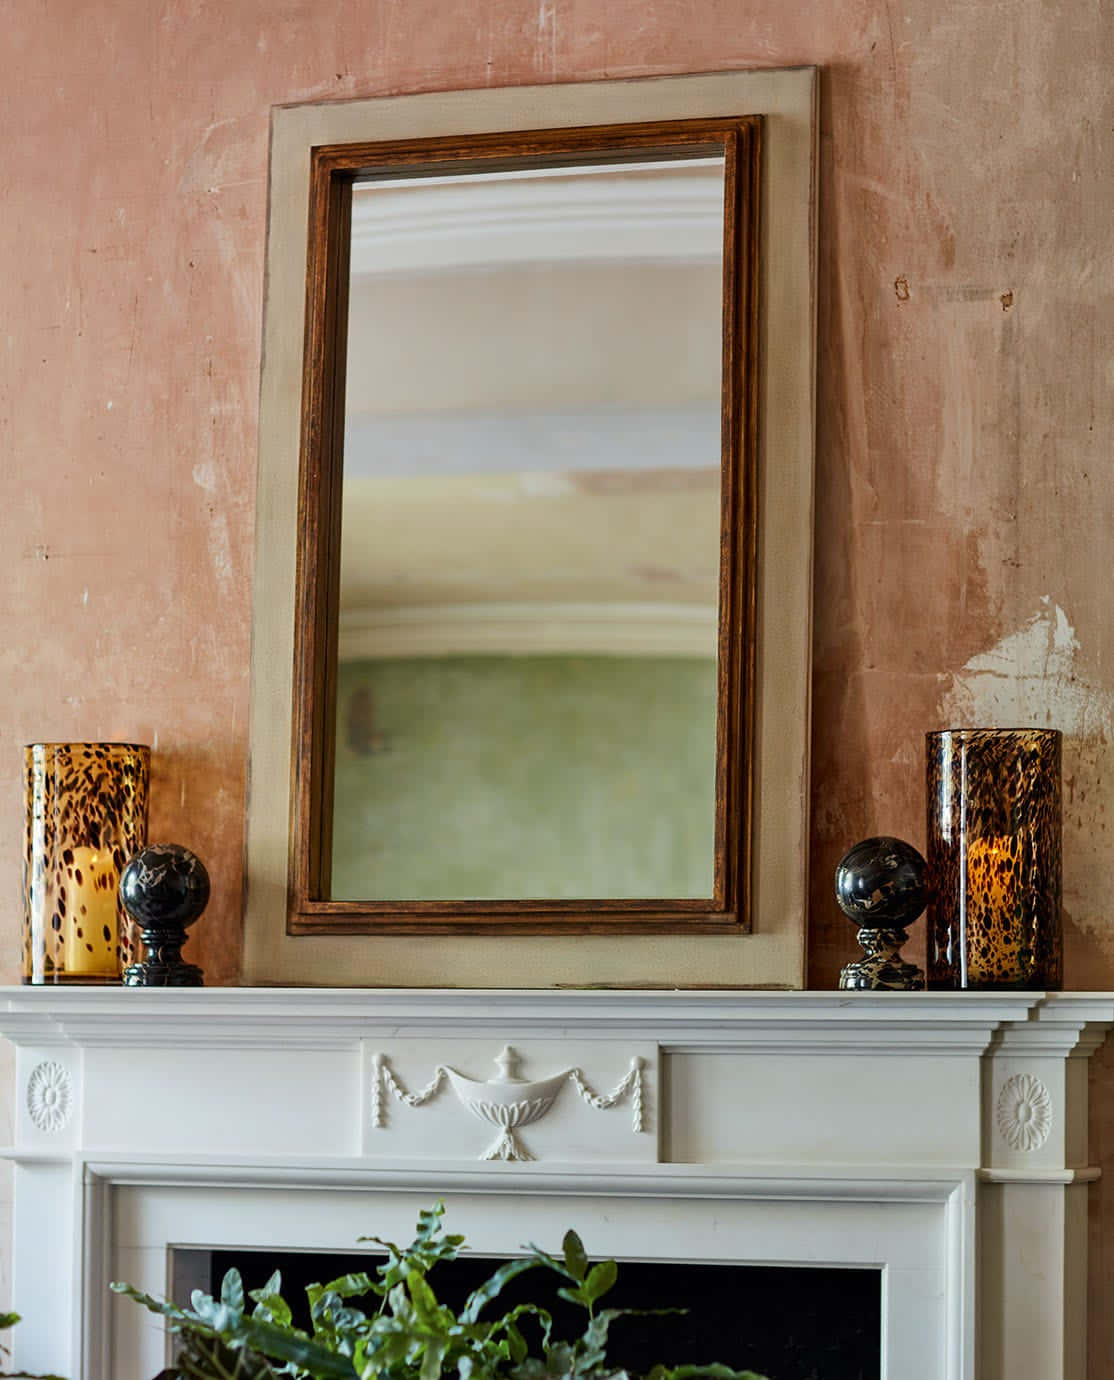 A Fireplace With A Mirror Above It